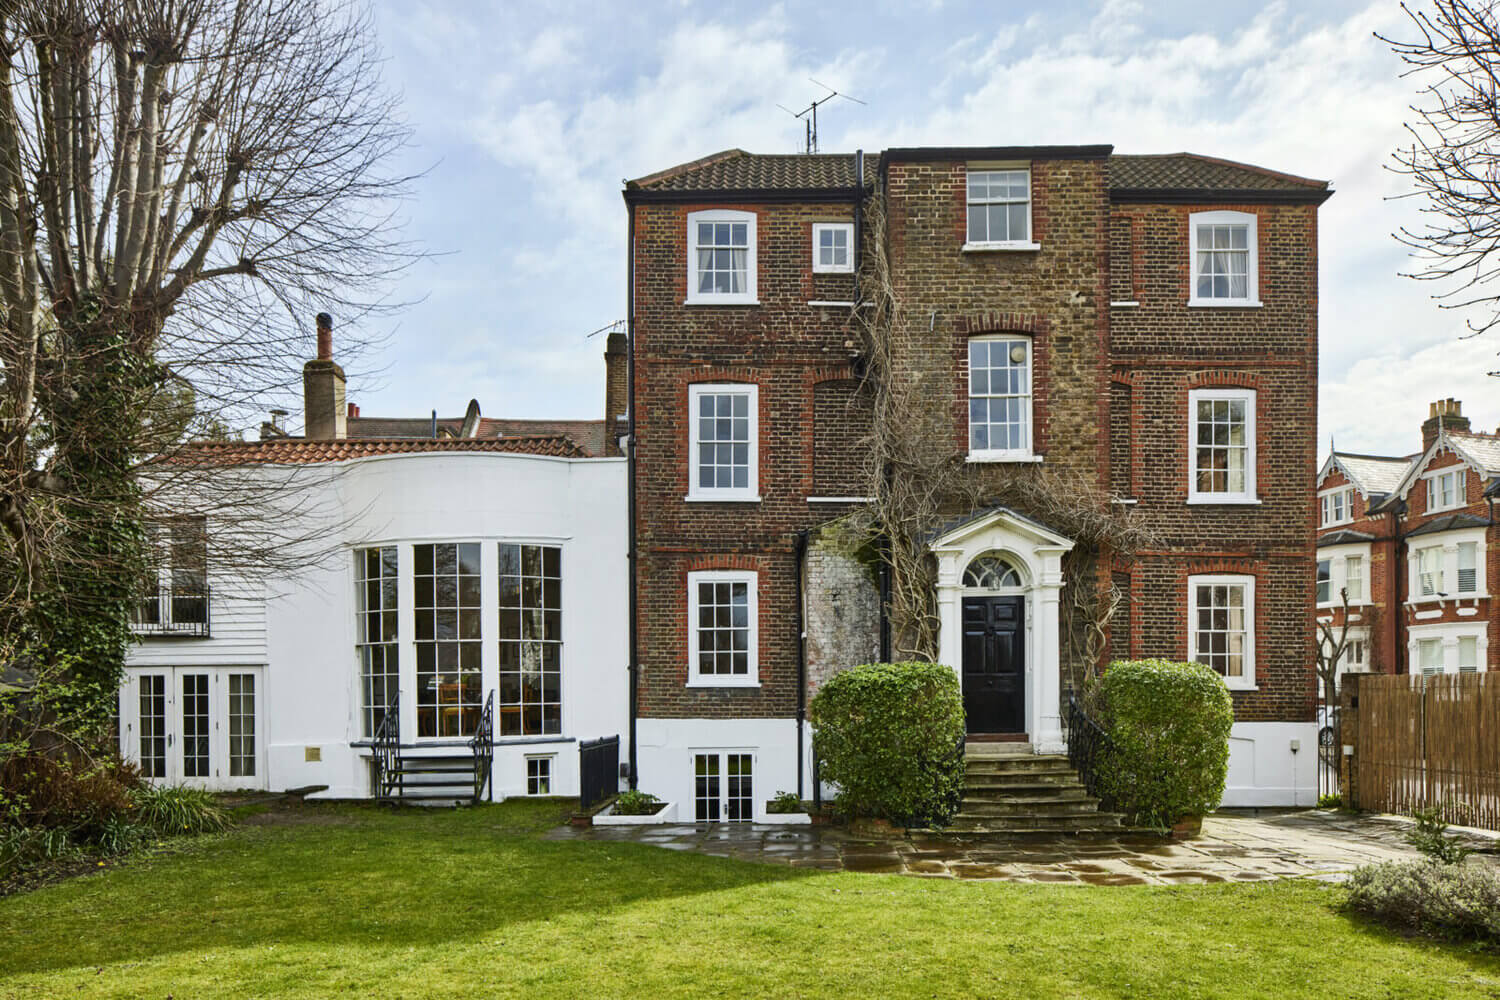 An Elegant 18th-Century House With Its Own Ballroom